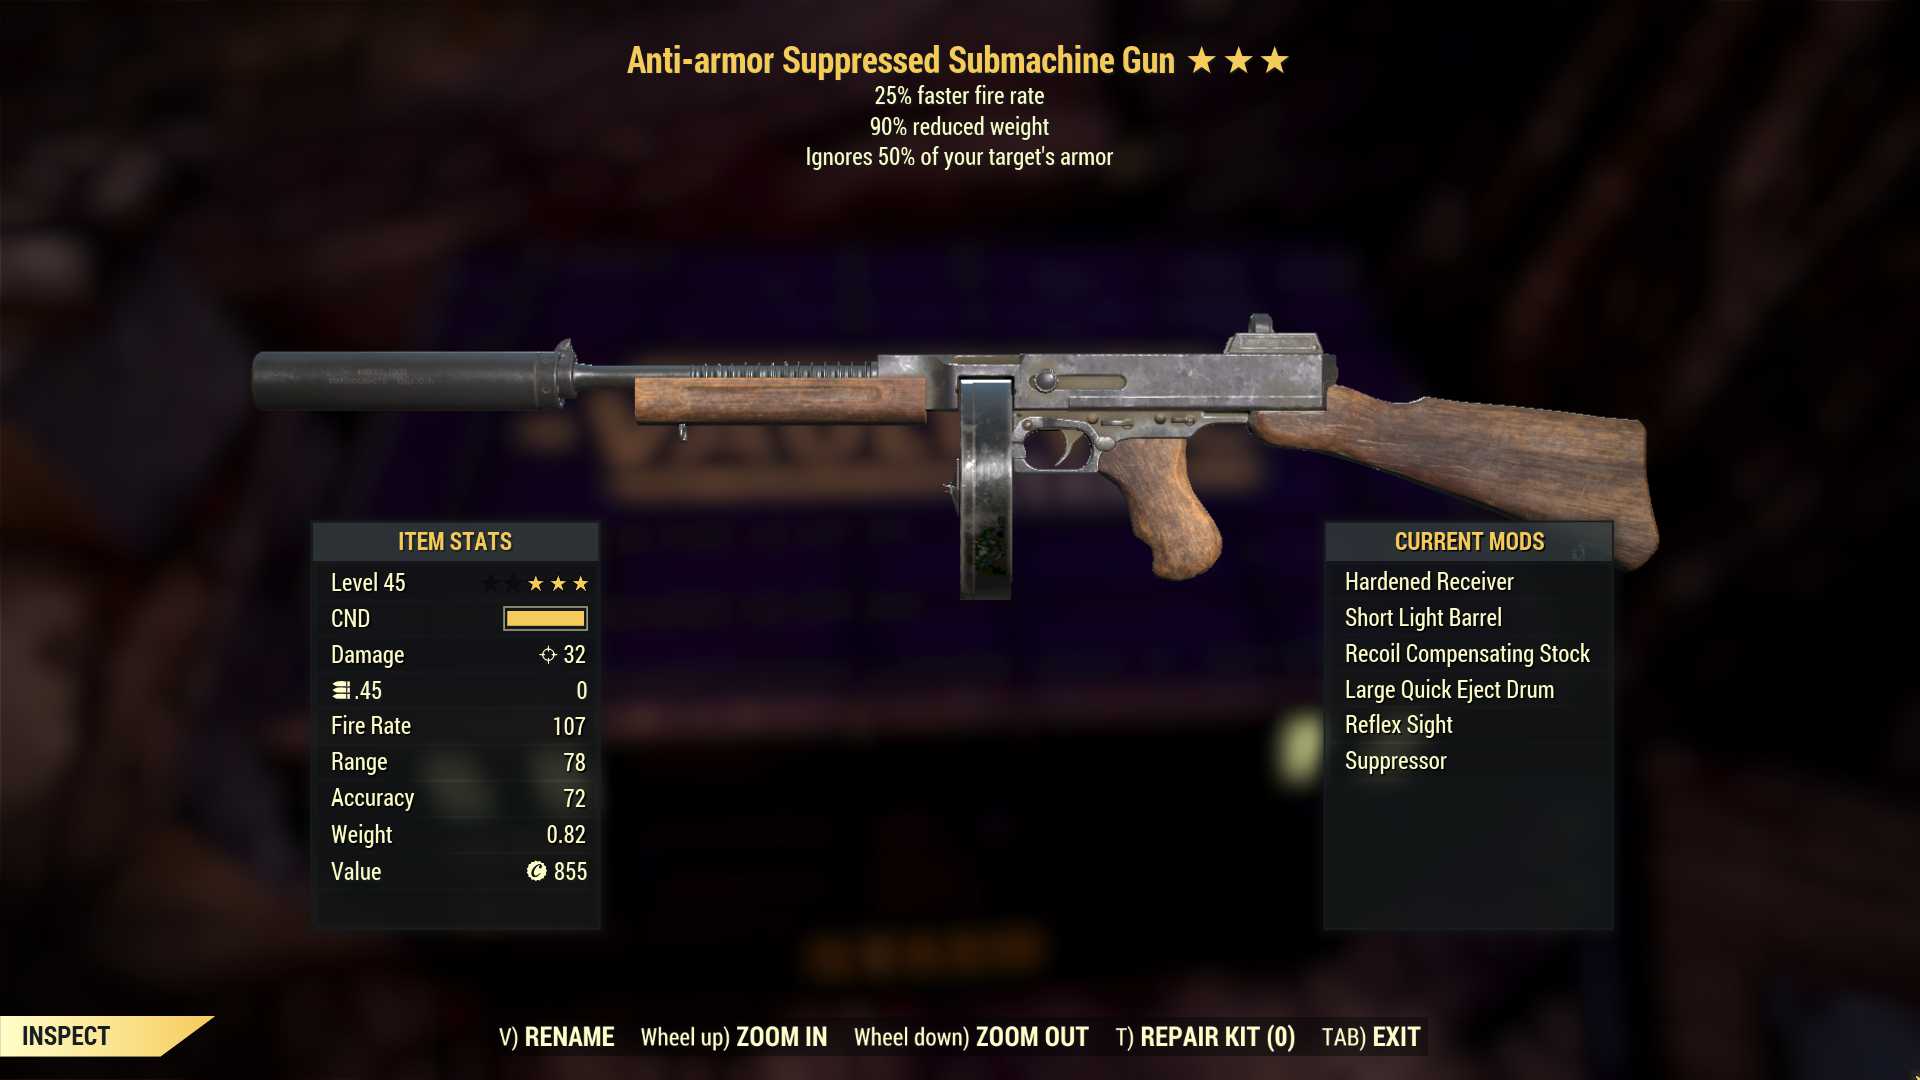 Anti-Armor Submachine Gun (25% faster fire rate, 90% reduced weight)